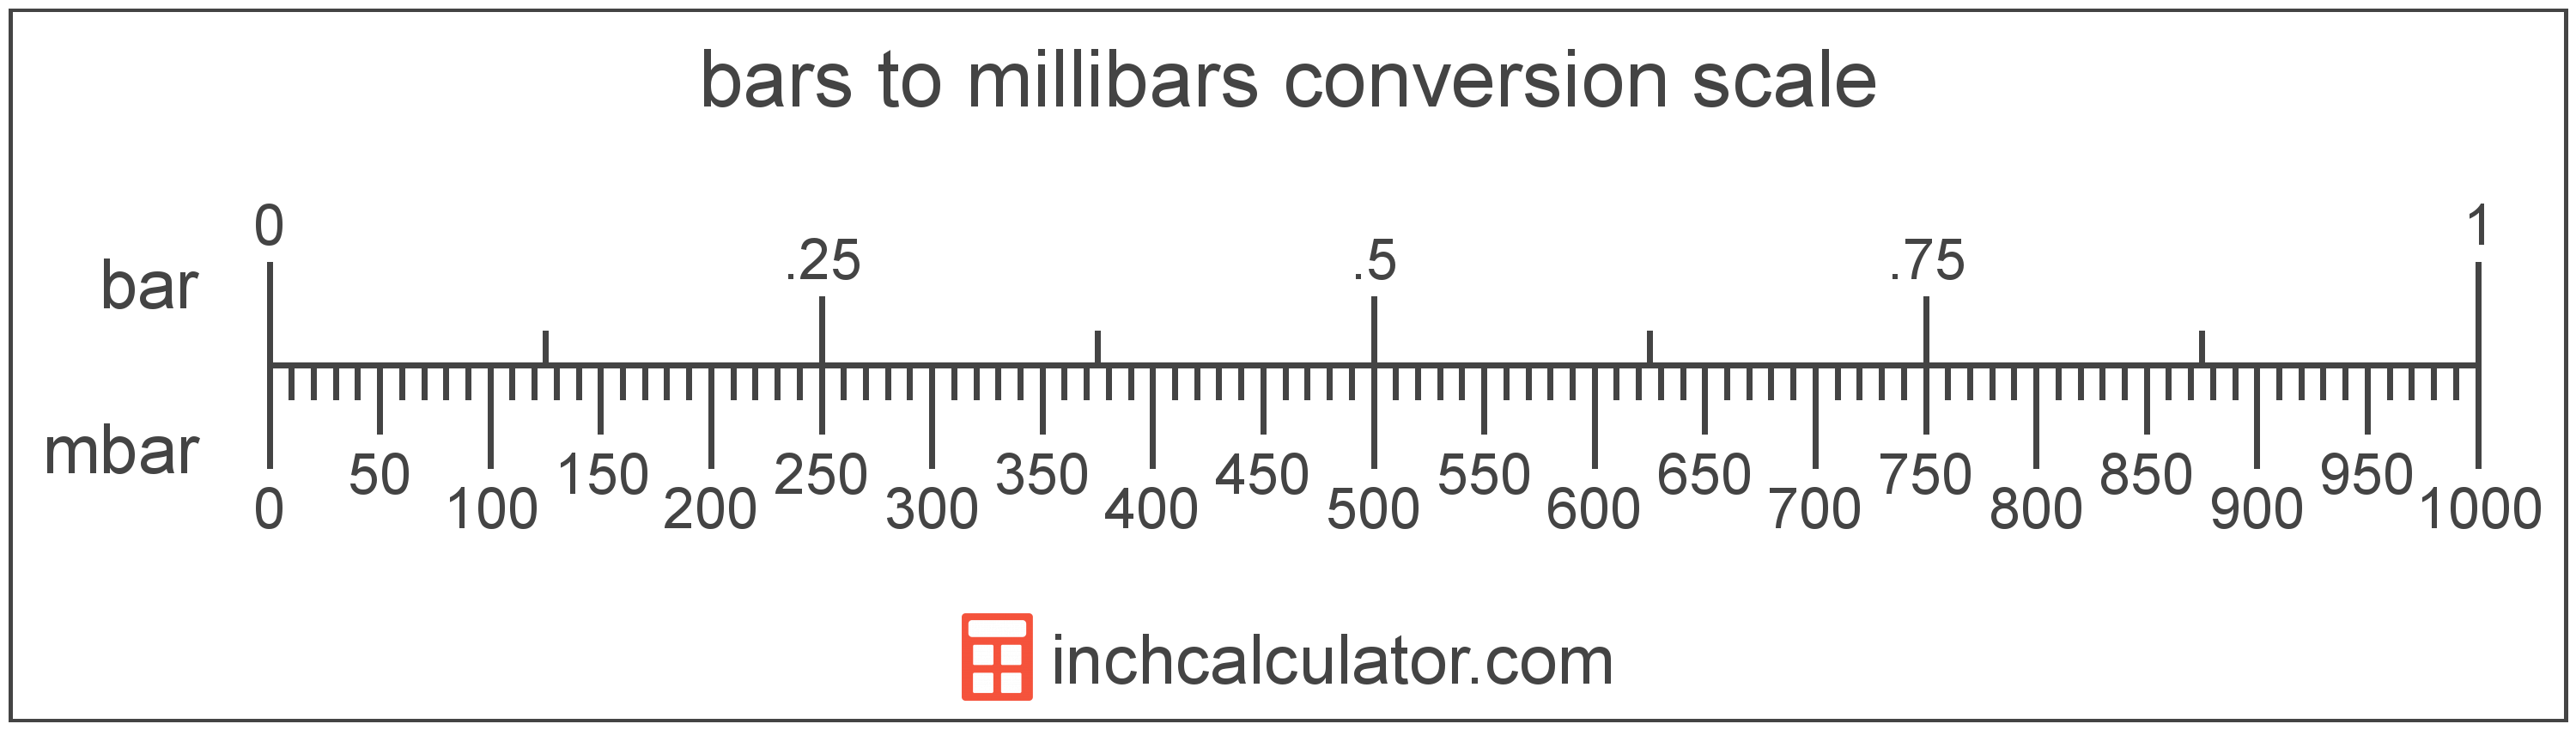 conversion scale showing millibars and equivalent bars pressure values